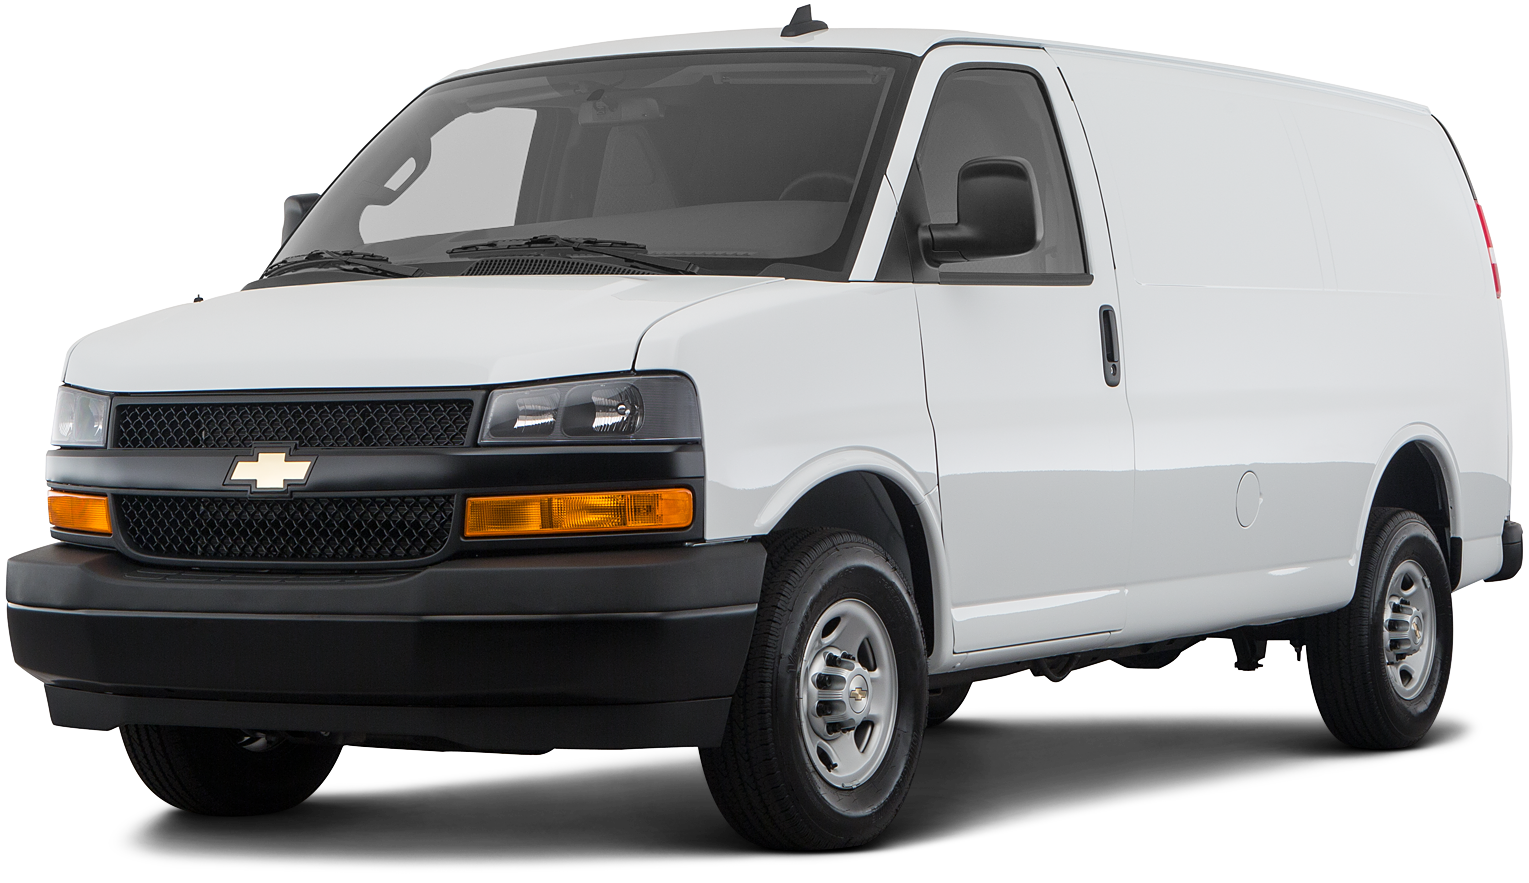 2020 Chevrolet Express 2500 Incentives, Specials & Offers in SCOTTSDALE AZ